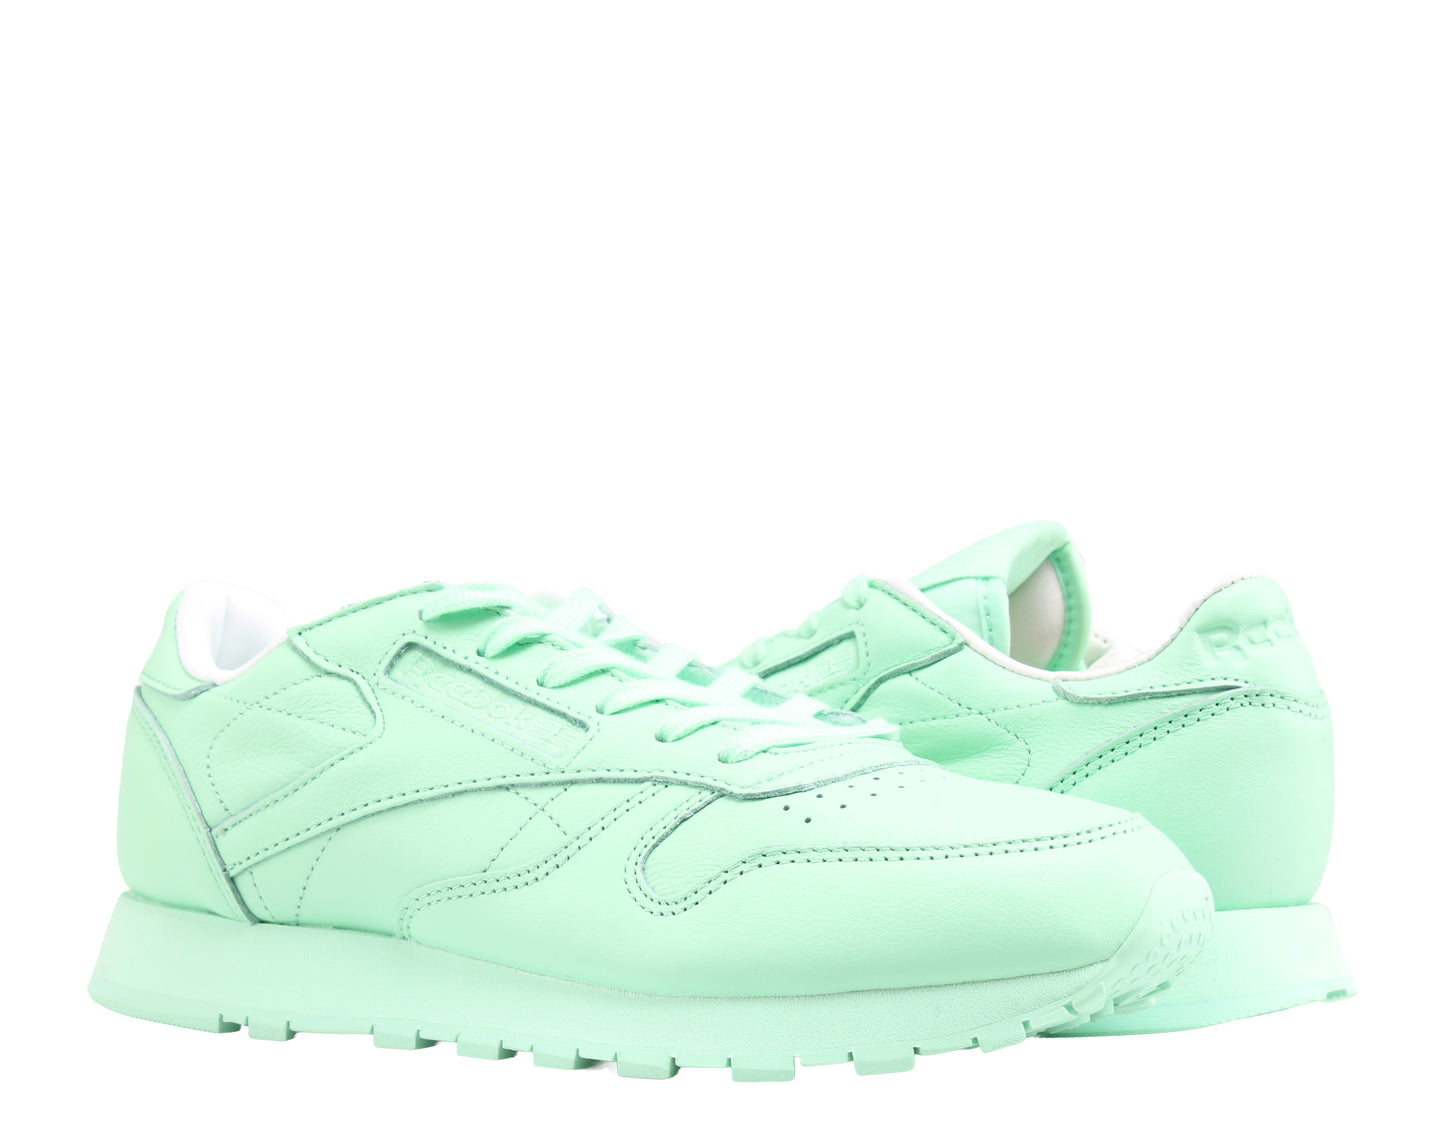 Reebok Classic Leather Pastels Women's Running Shoes